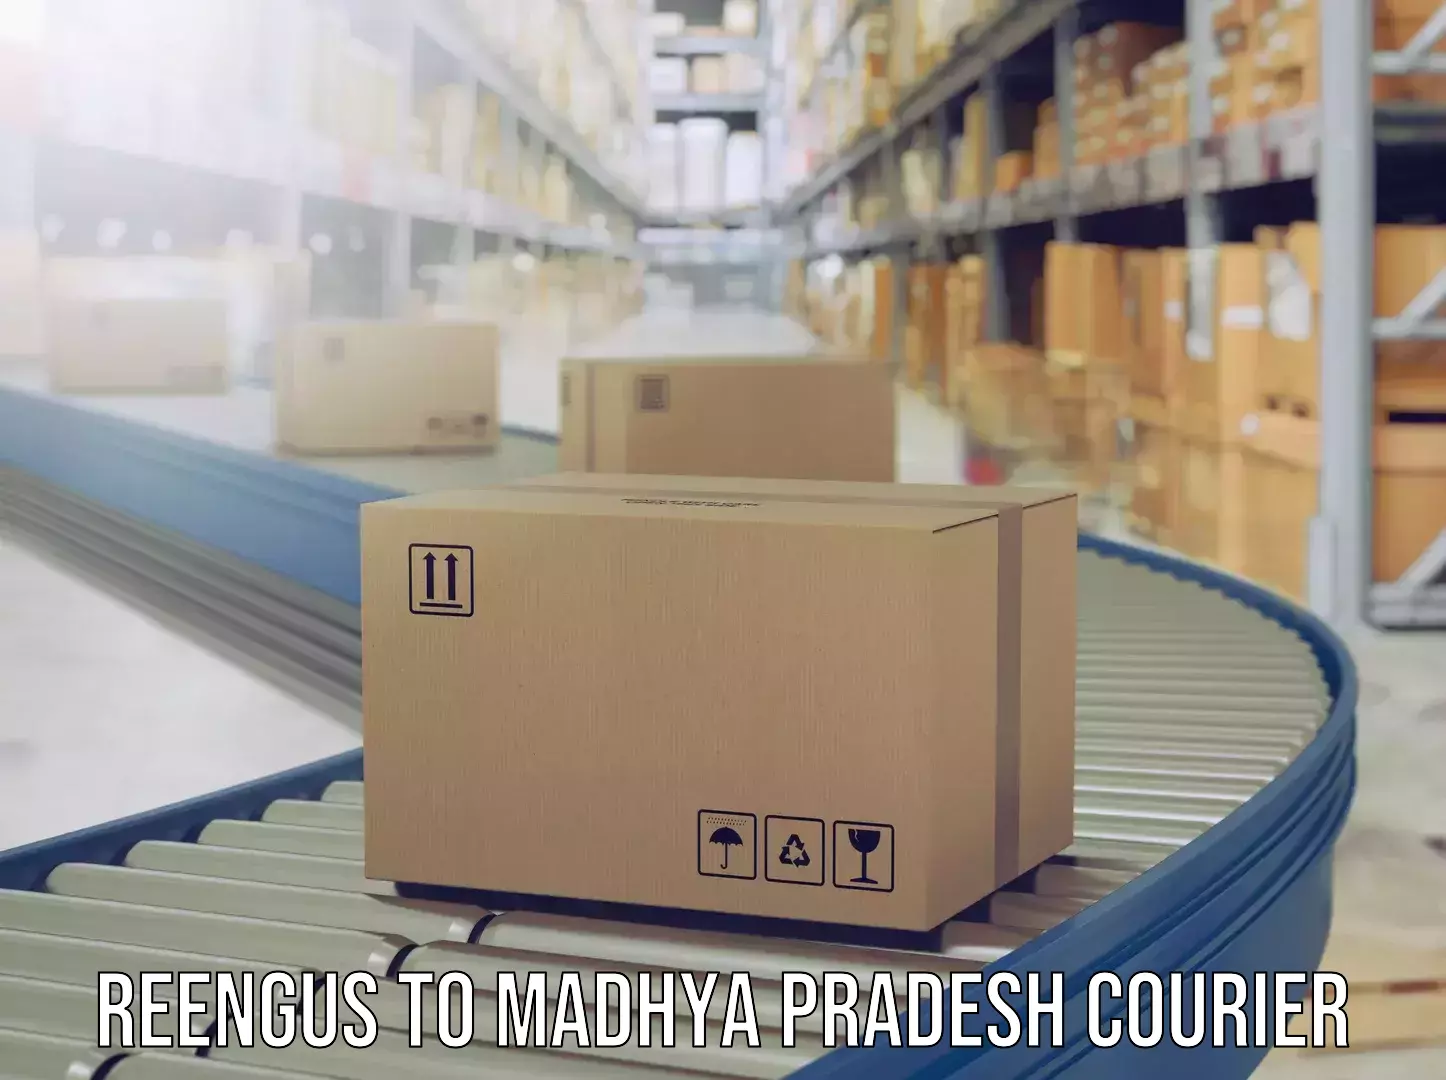 Hassle-free luggage shipping Reengus to Prithvipur